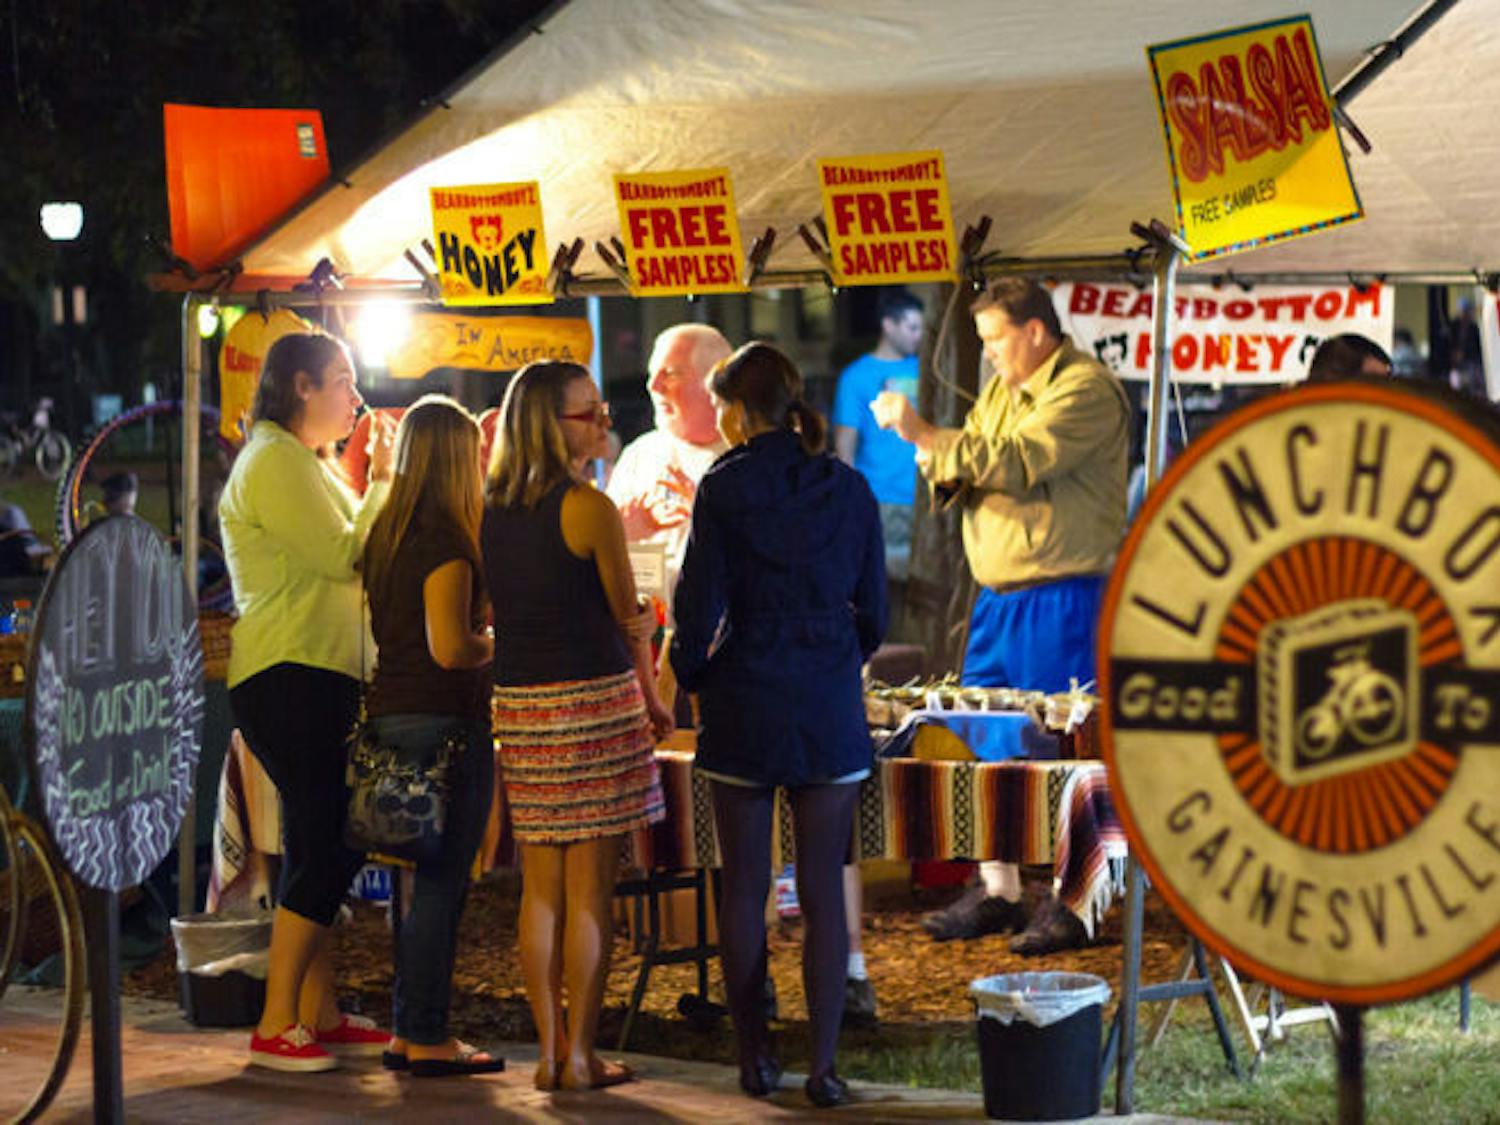 Gainesville residents gather around a vendor's booth near the Lunch Box during the Union Street Farmers Market Wednesday evening.